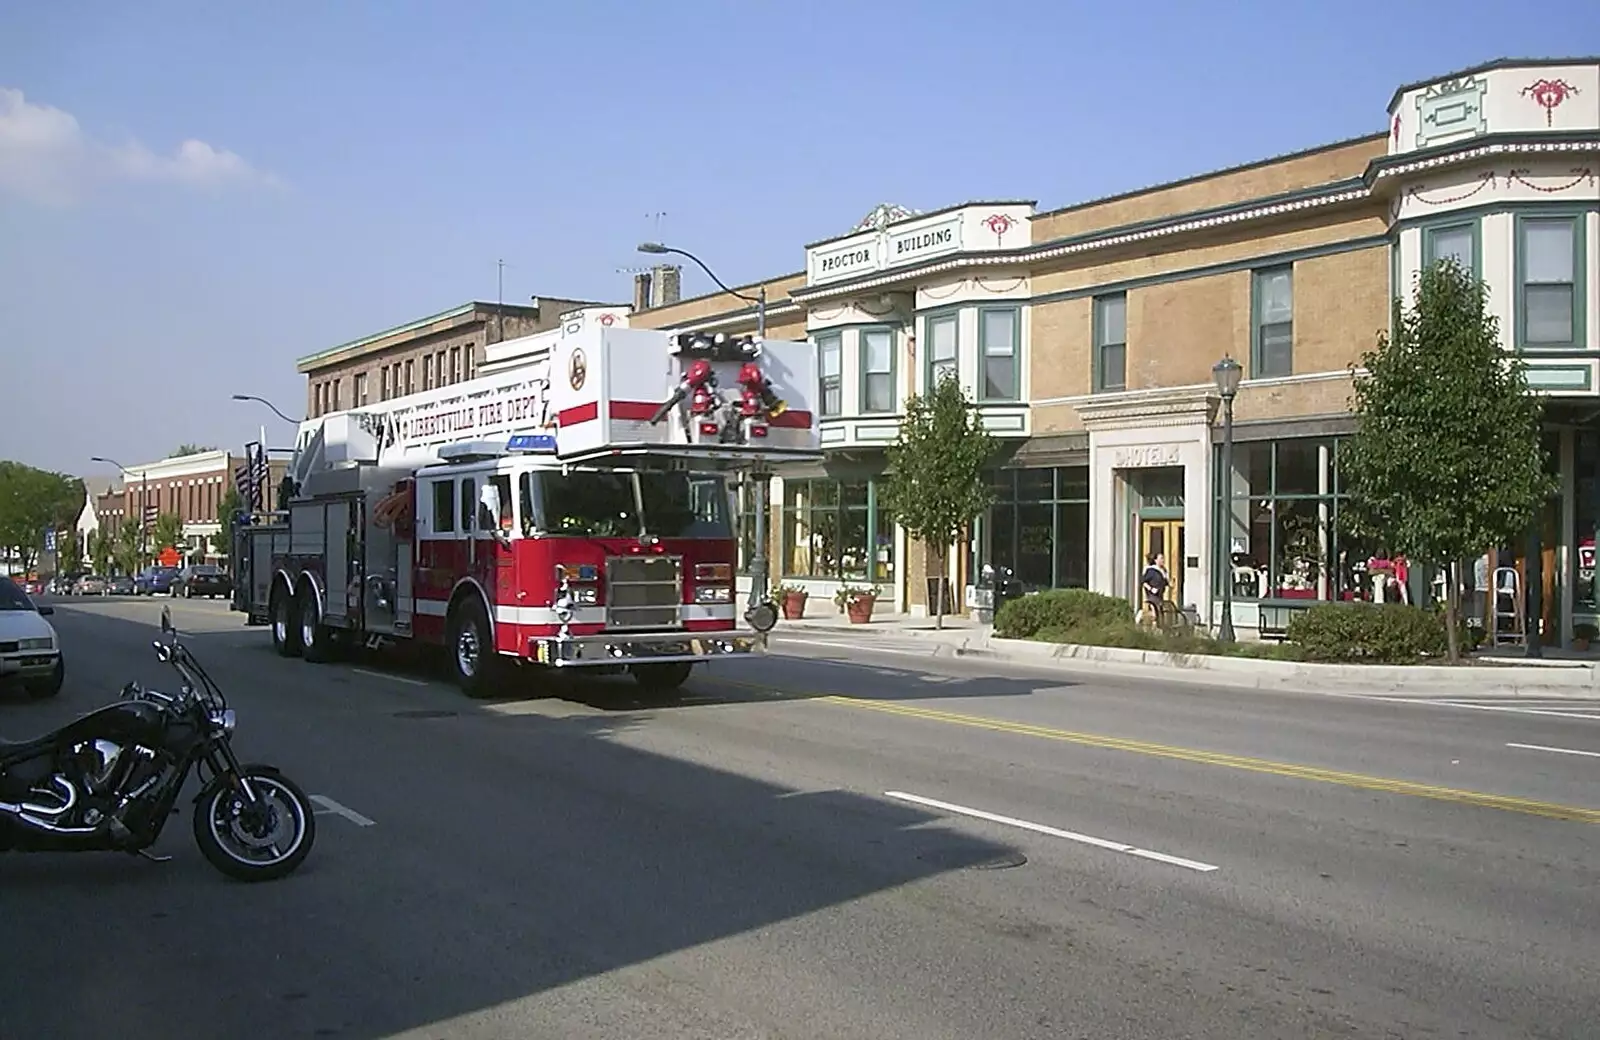 A fire engine rushes past, from A Trip to Libertyville, Illinois, USA - 31st August 2004